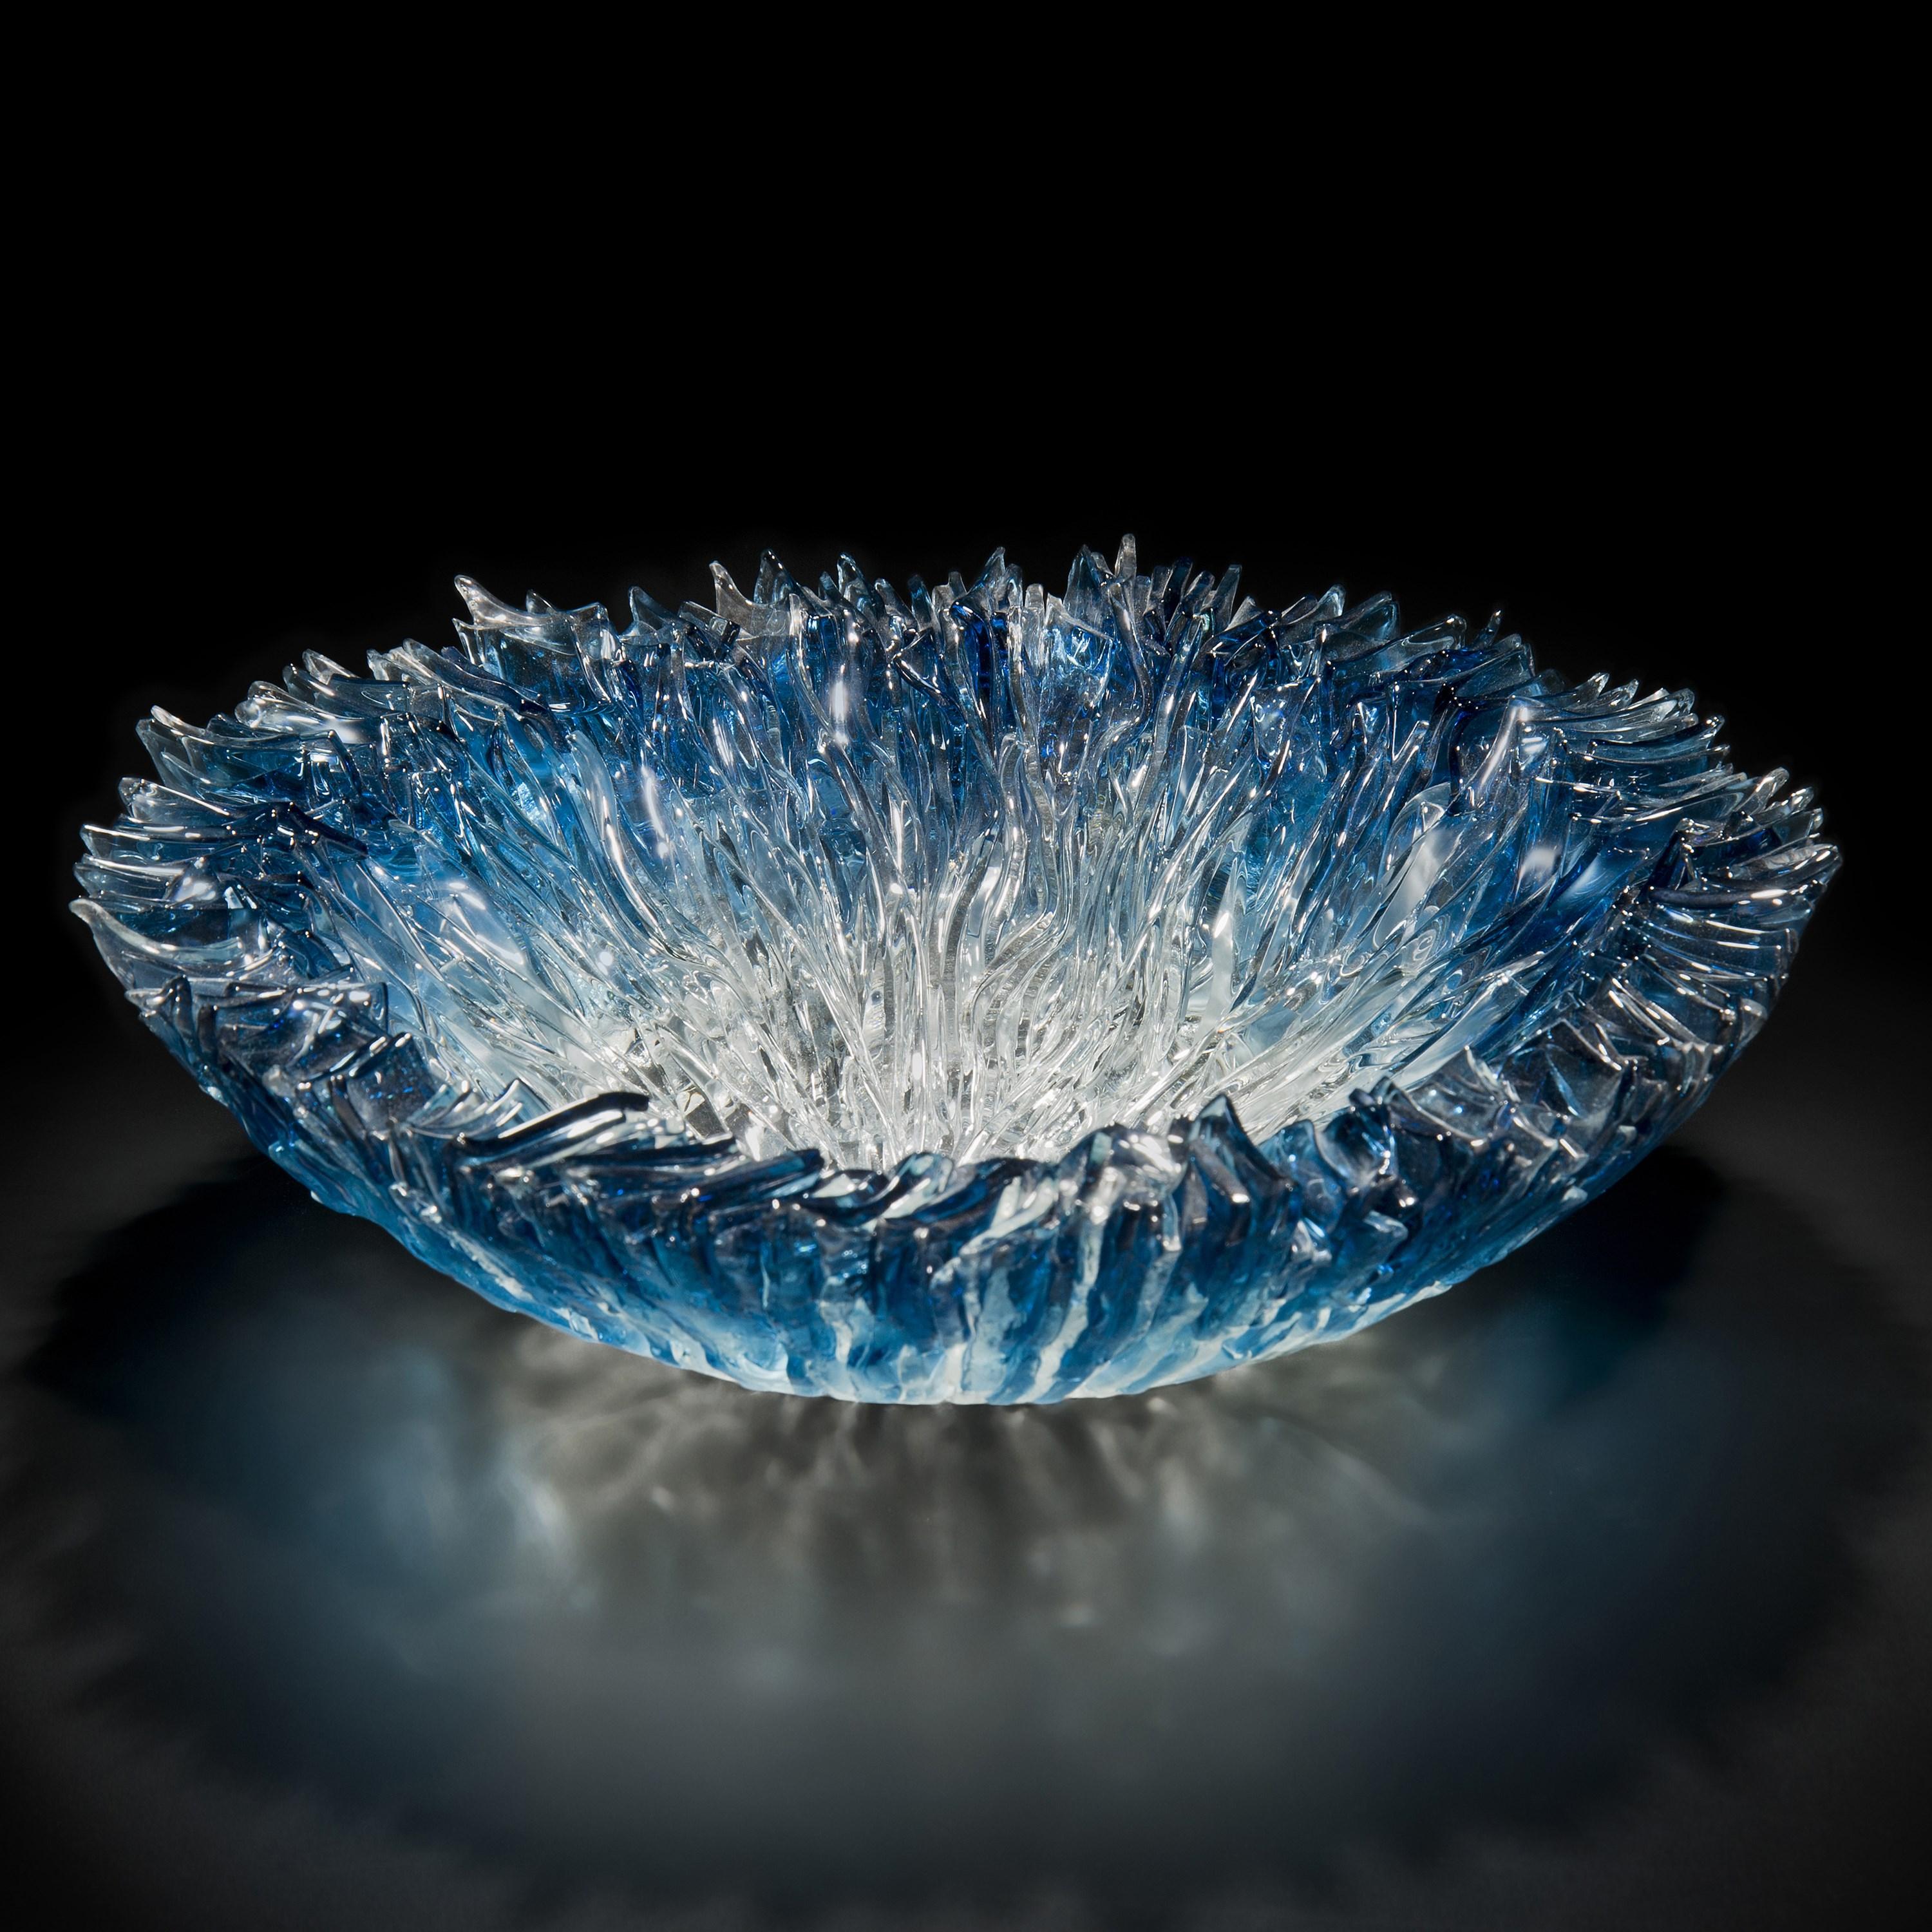 'Bloom Bowl in Aqua' is a unique sculptural centrepiece created by the British artist, Wayne Charmer.

For Wayne Charmer, the fascination of glass is to exploit its translucent and reflective qualities. Inspired by nature, his signature techniques